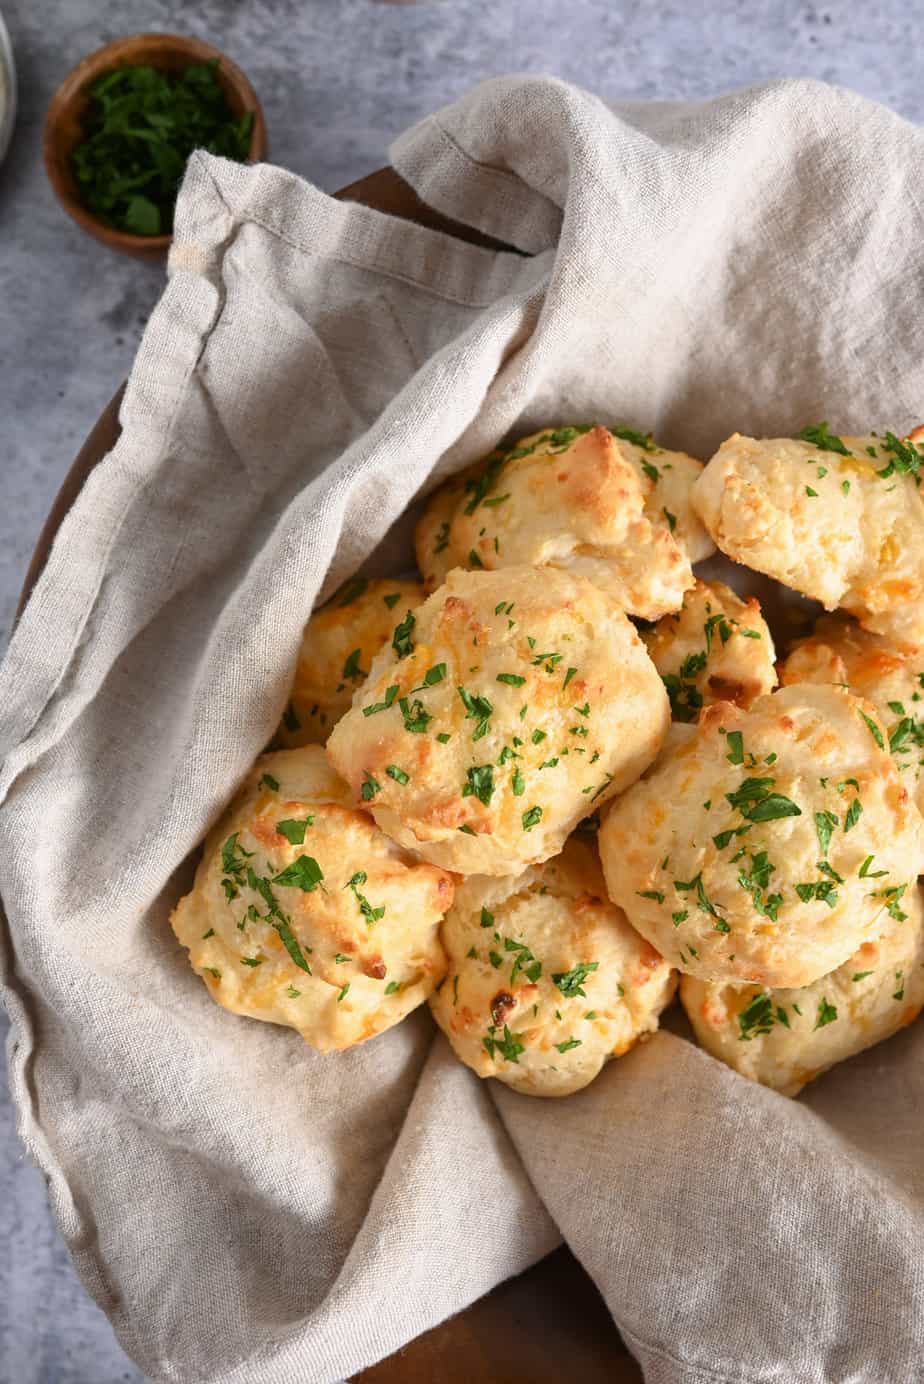 A batch of homemade red lobster biscuits in a towel-lined bread basket.